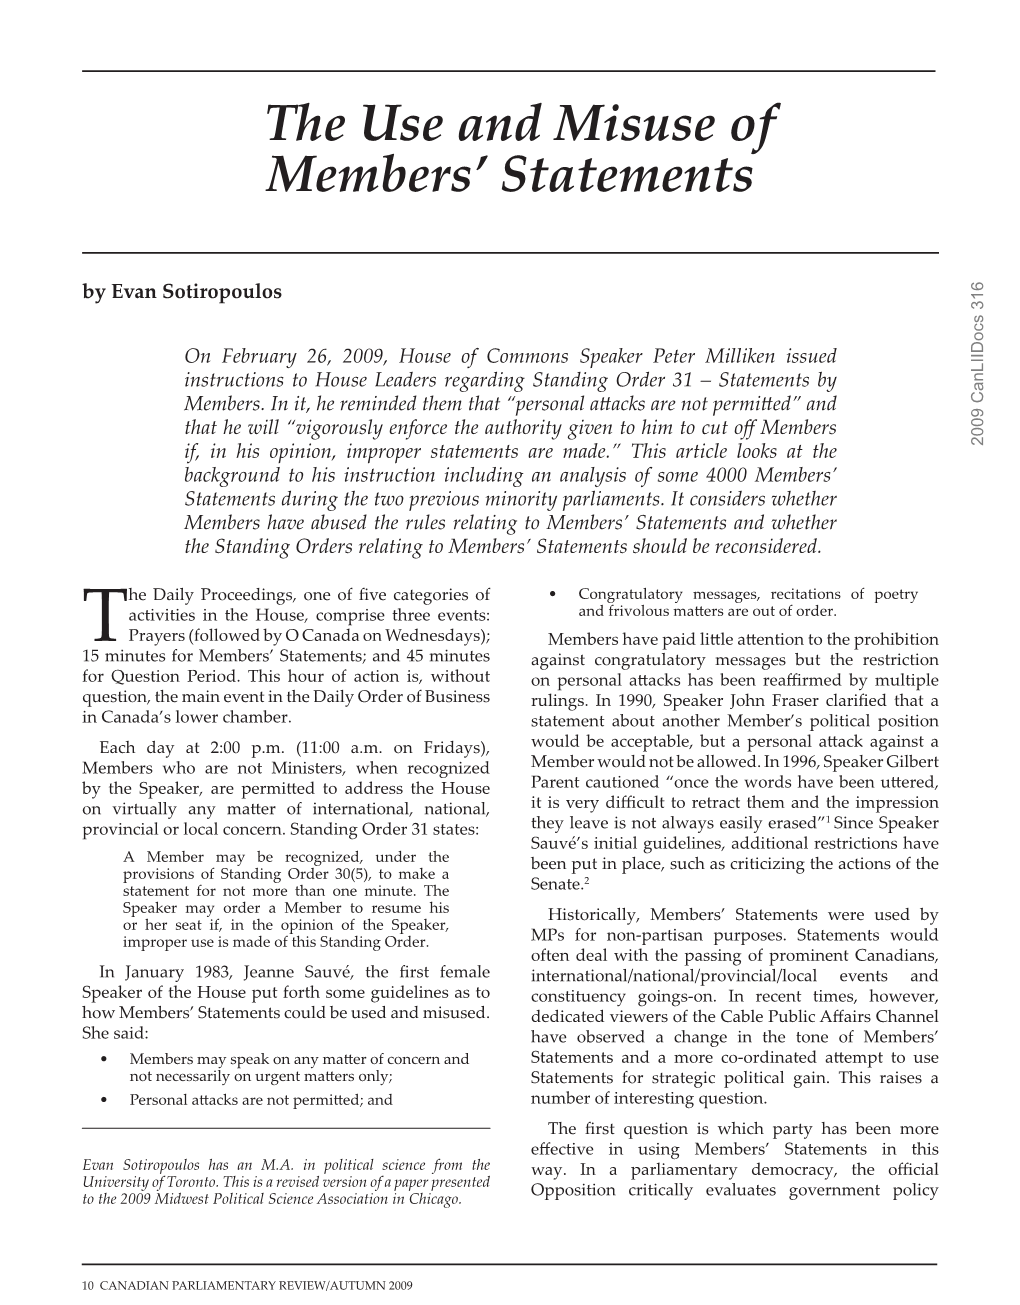 The Use and Misuse of Members' Statements